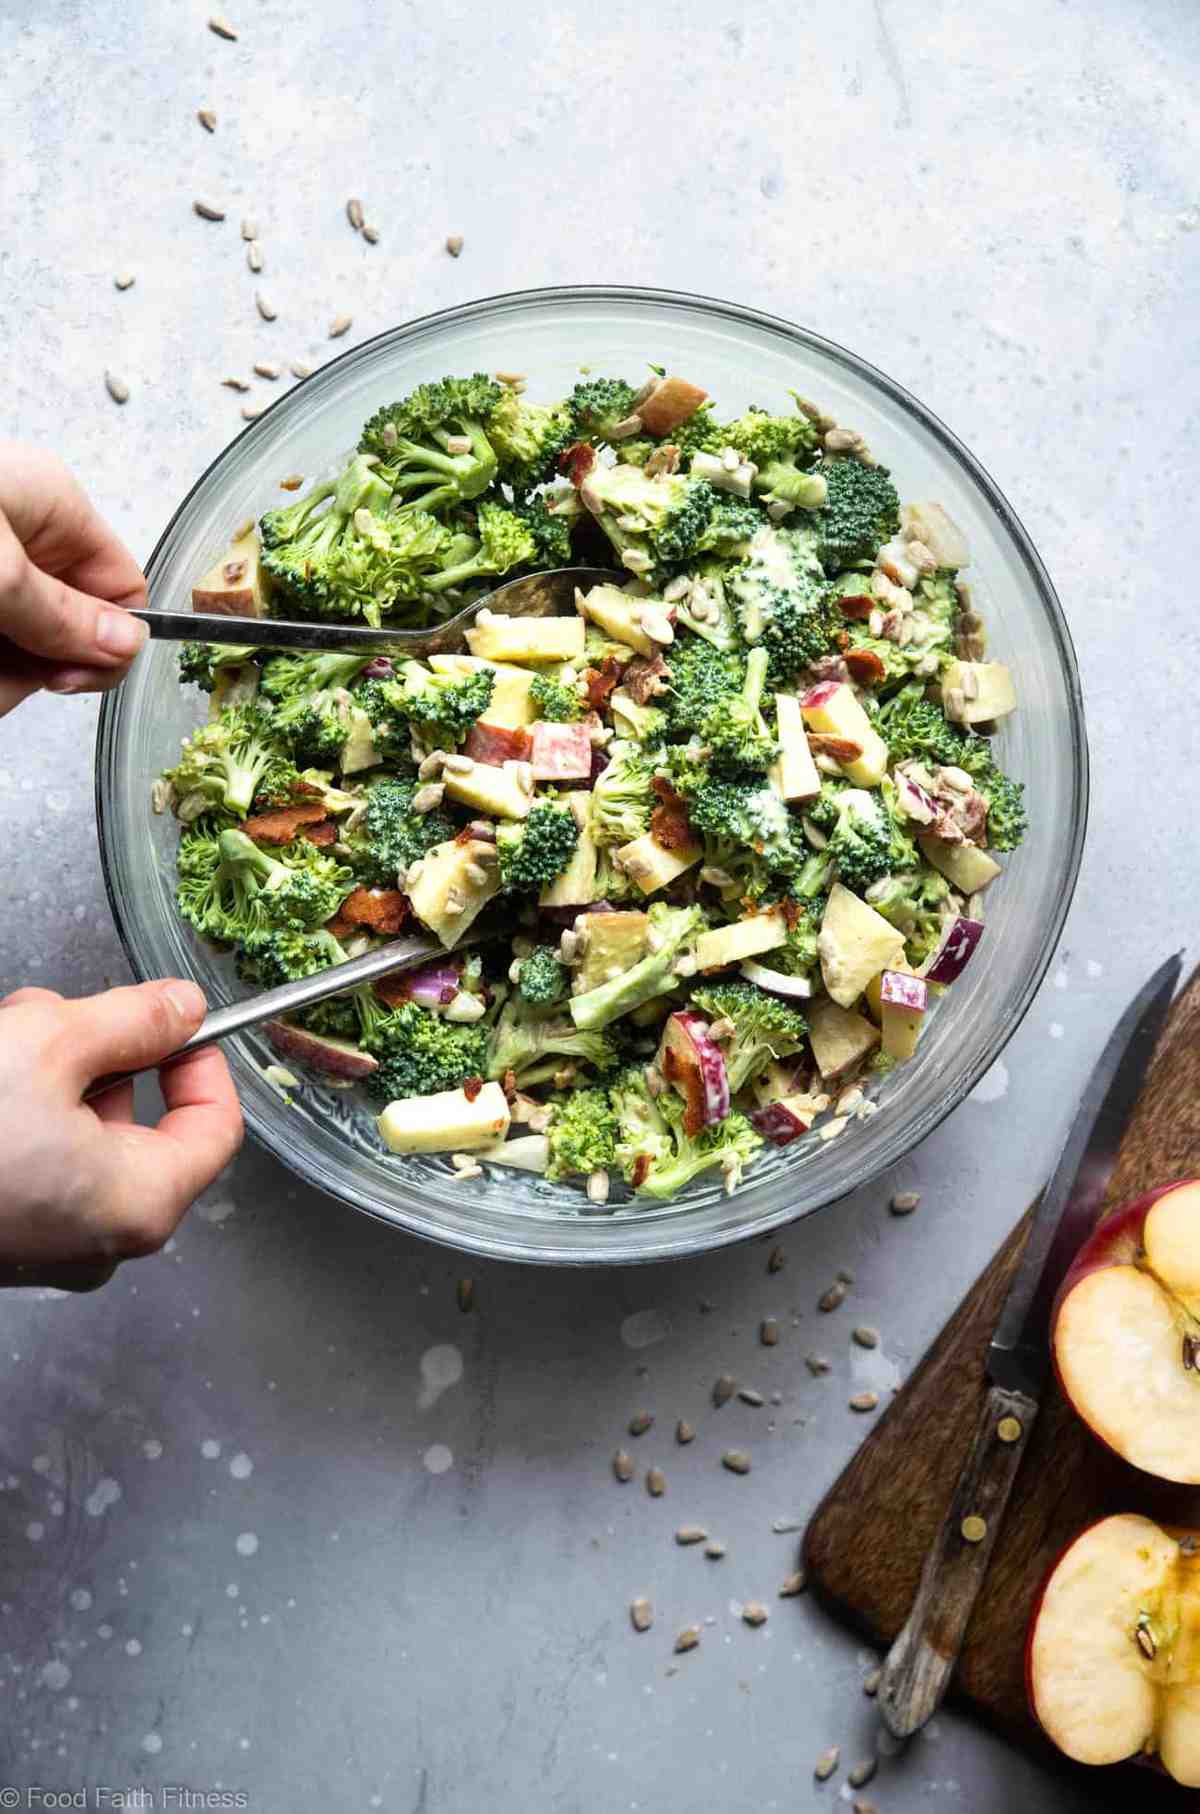 Honey Mustard Broccoli Apple Salad with Greek Yogurt  - An easy, gluten free and healthy side dish that even kids will like! It's protein packed and makes great leftovers! | #Foodfaithfitness | #Glutenfree #Grainfree #Healthy #GreekYogurt